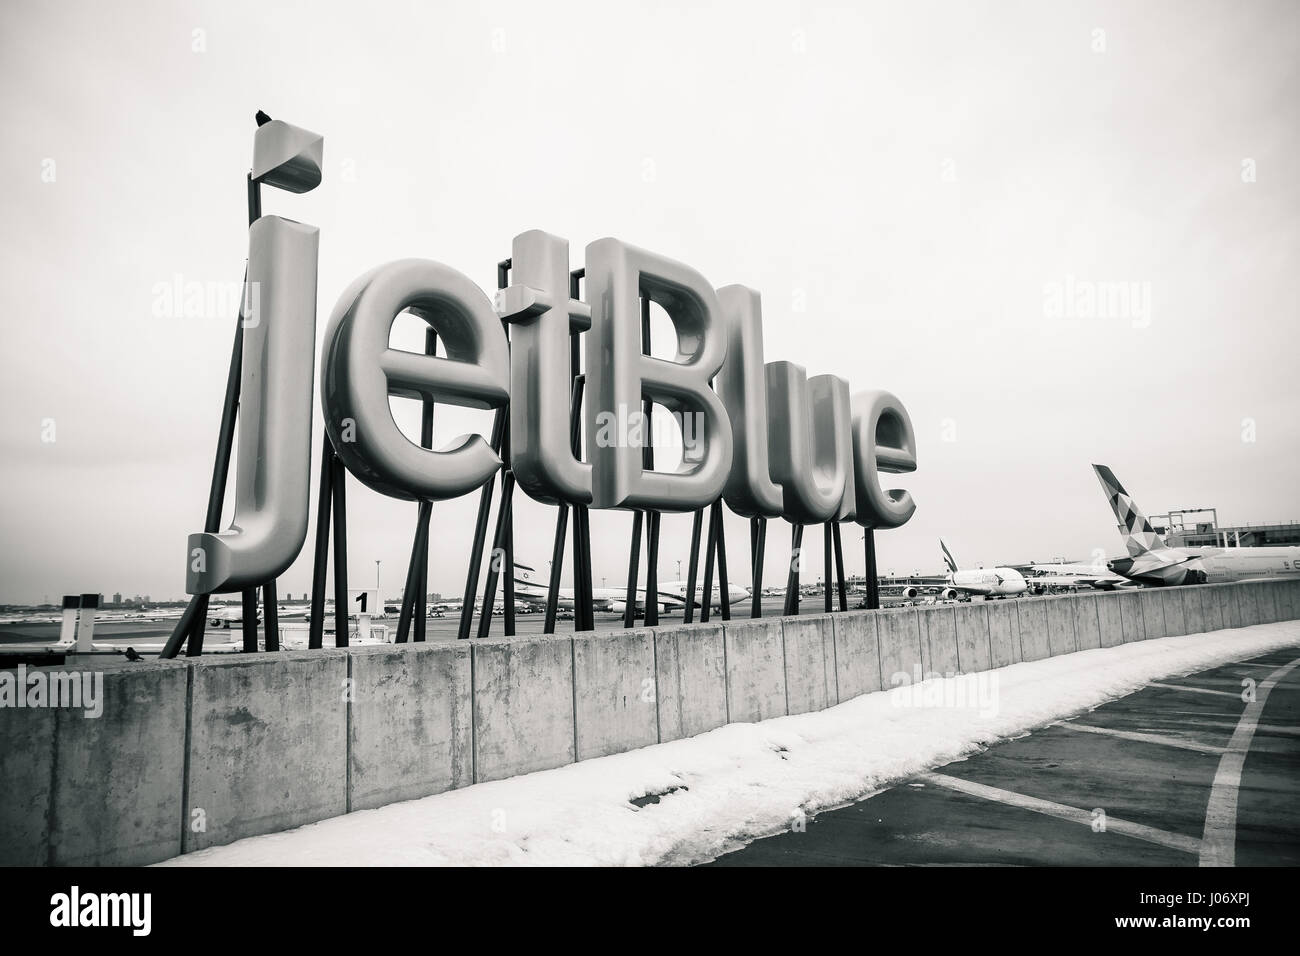 jetBlue sign is displayed near the entrance to the jetBlue terminal of the JFK airport. Stock Photo